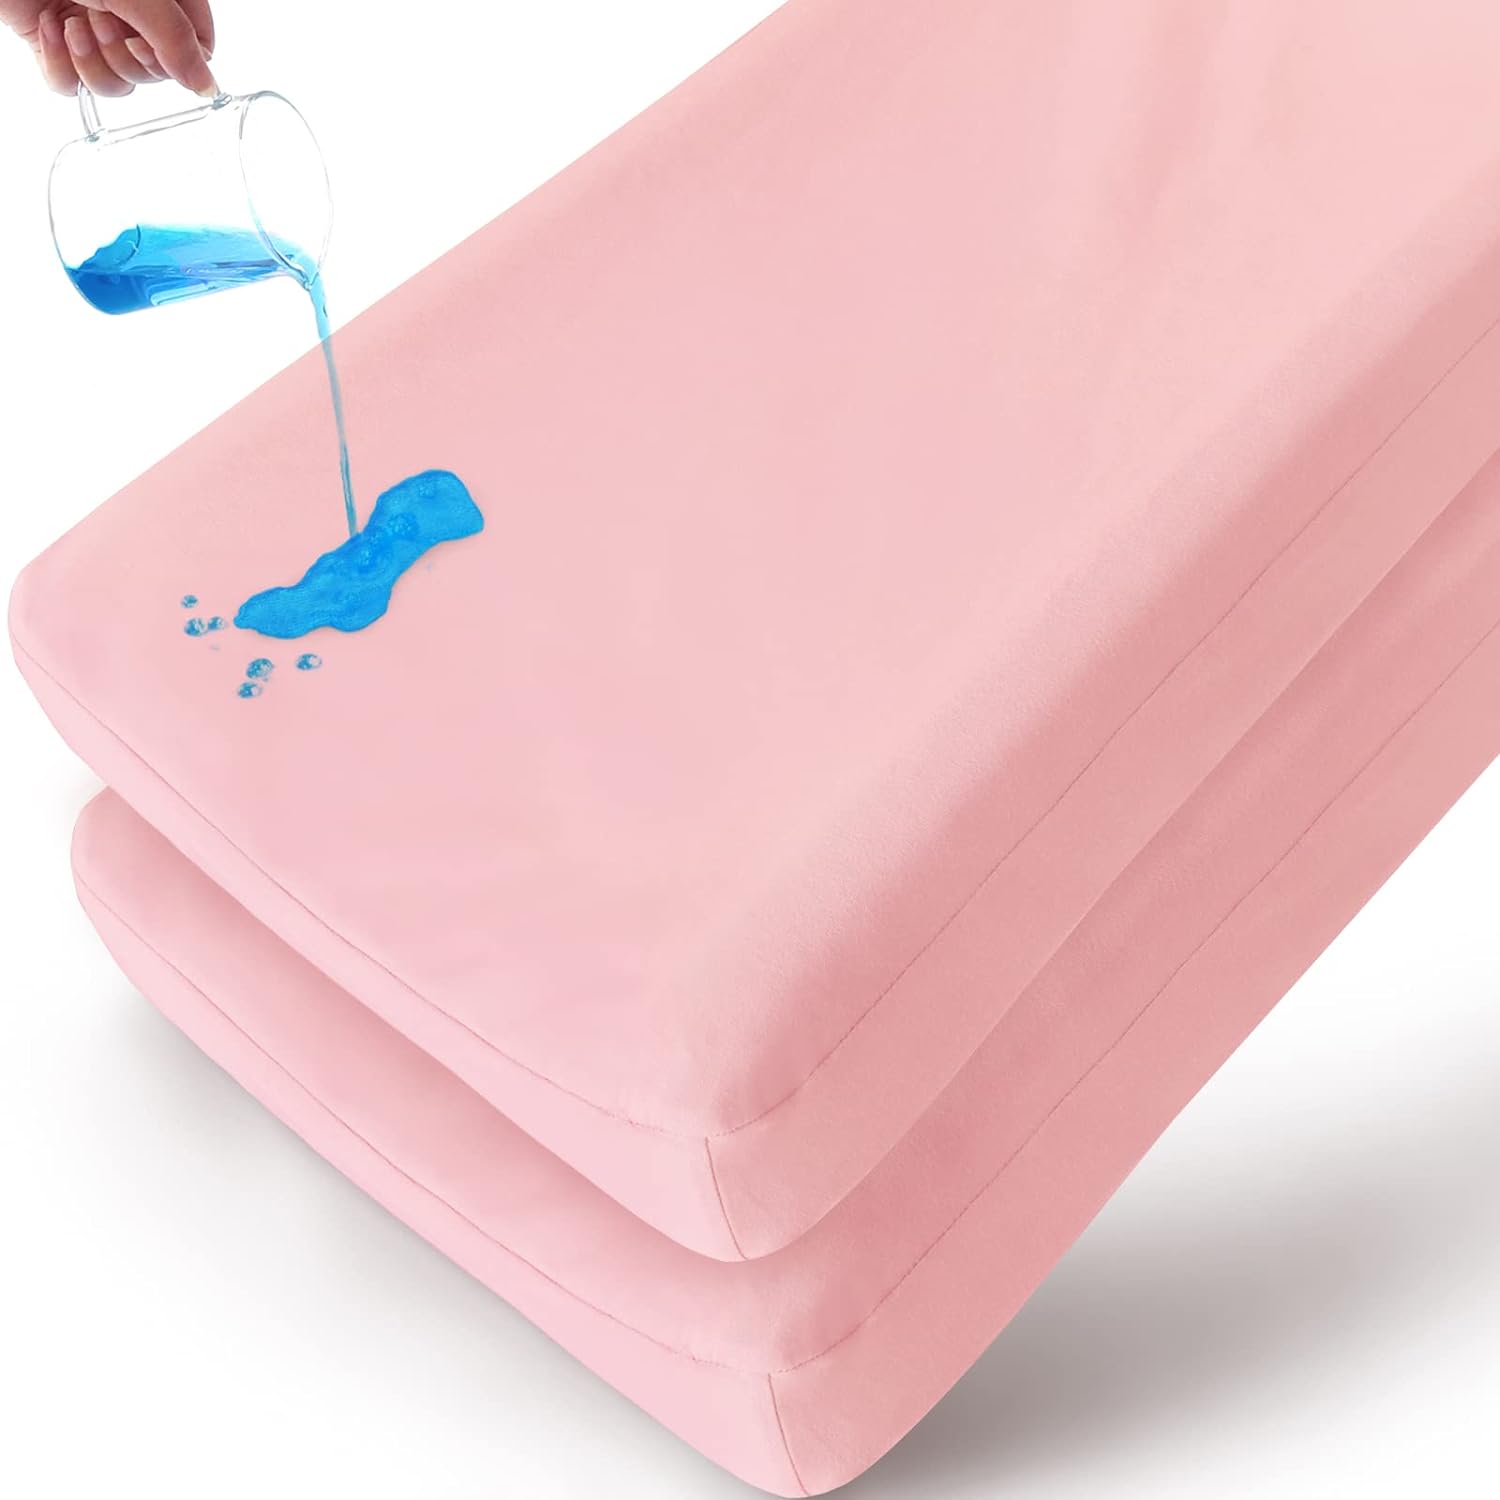 Waterproof Changing Pad Cover - 2 Pack, Ultra-Soft Microfiber, Smooth & Breathable, Pink - Biloban Online Store